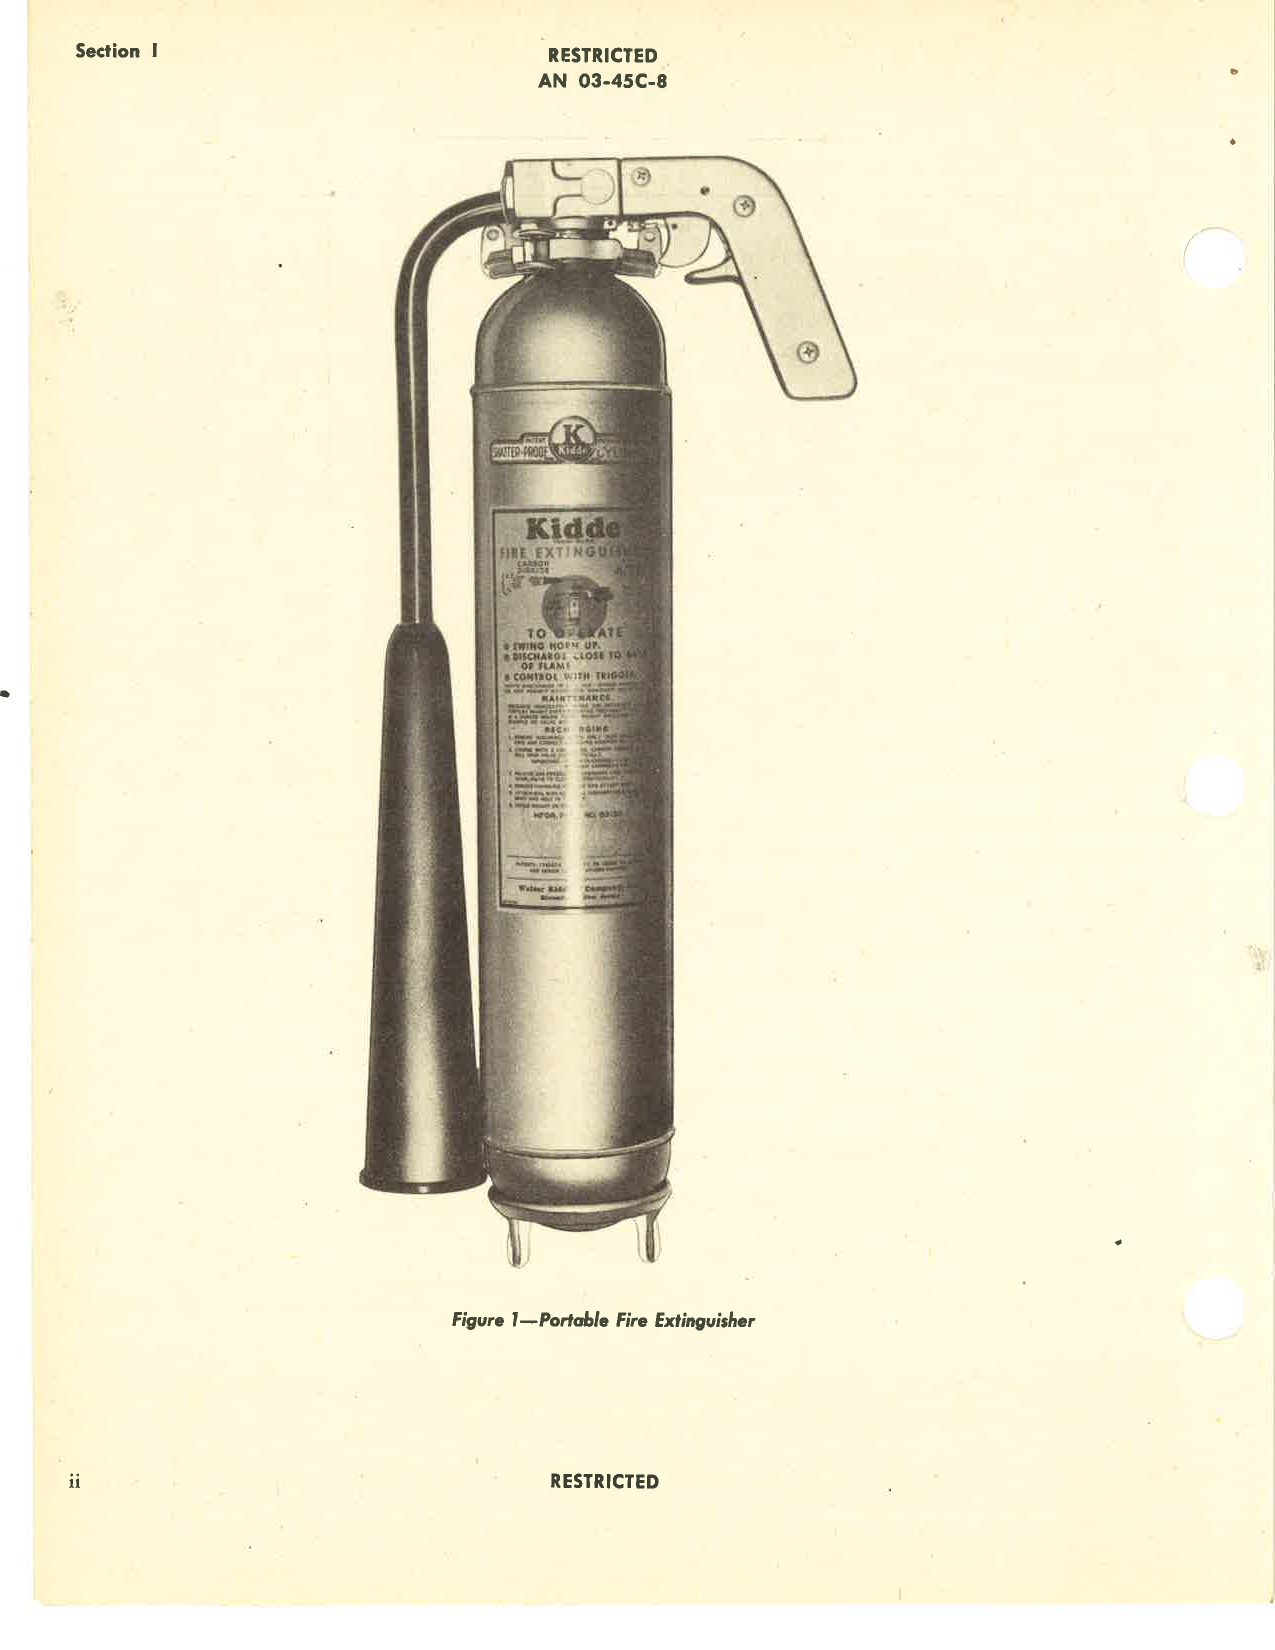 Sample page 4 from AirCorps Library document: Handbook of Instructions with Parts Catalog for 2TB and 4TB Portable Fire Extinguishers